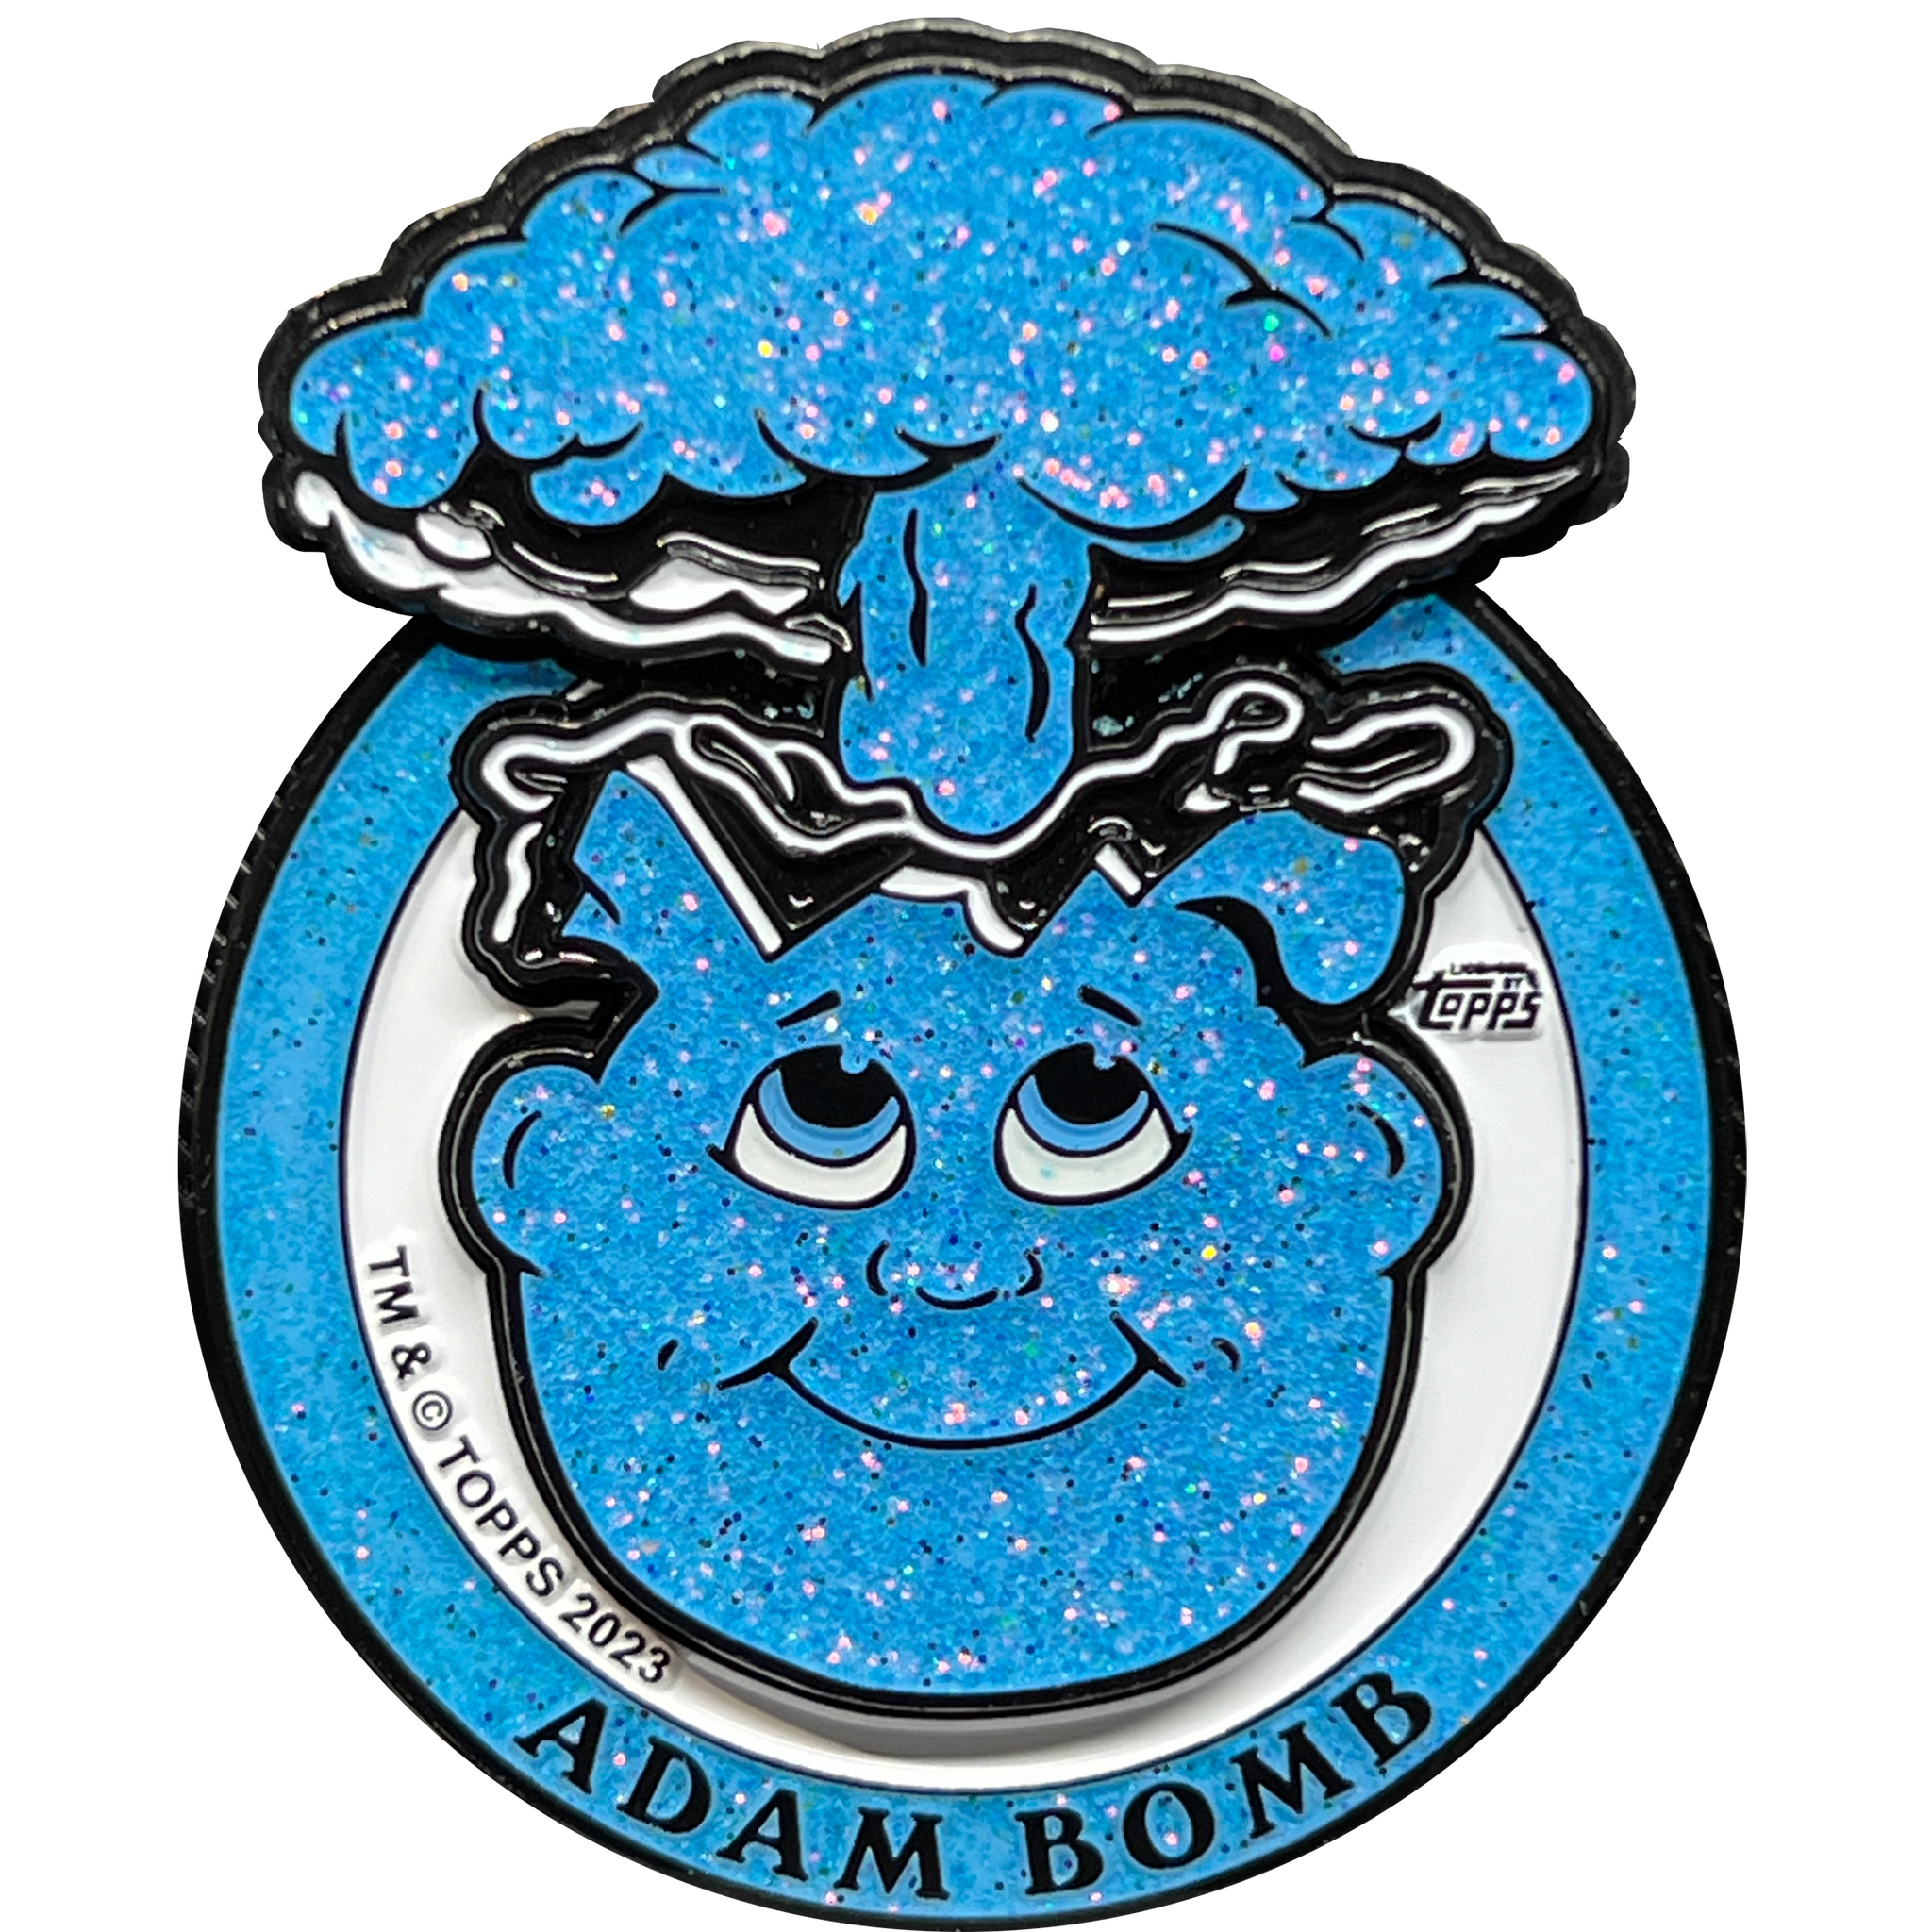 Powder Blue Glitter plated 3-piece Adam Bomb Challenge Coin limited to 15 pieces with individual serial number